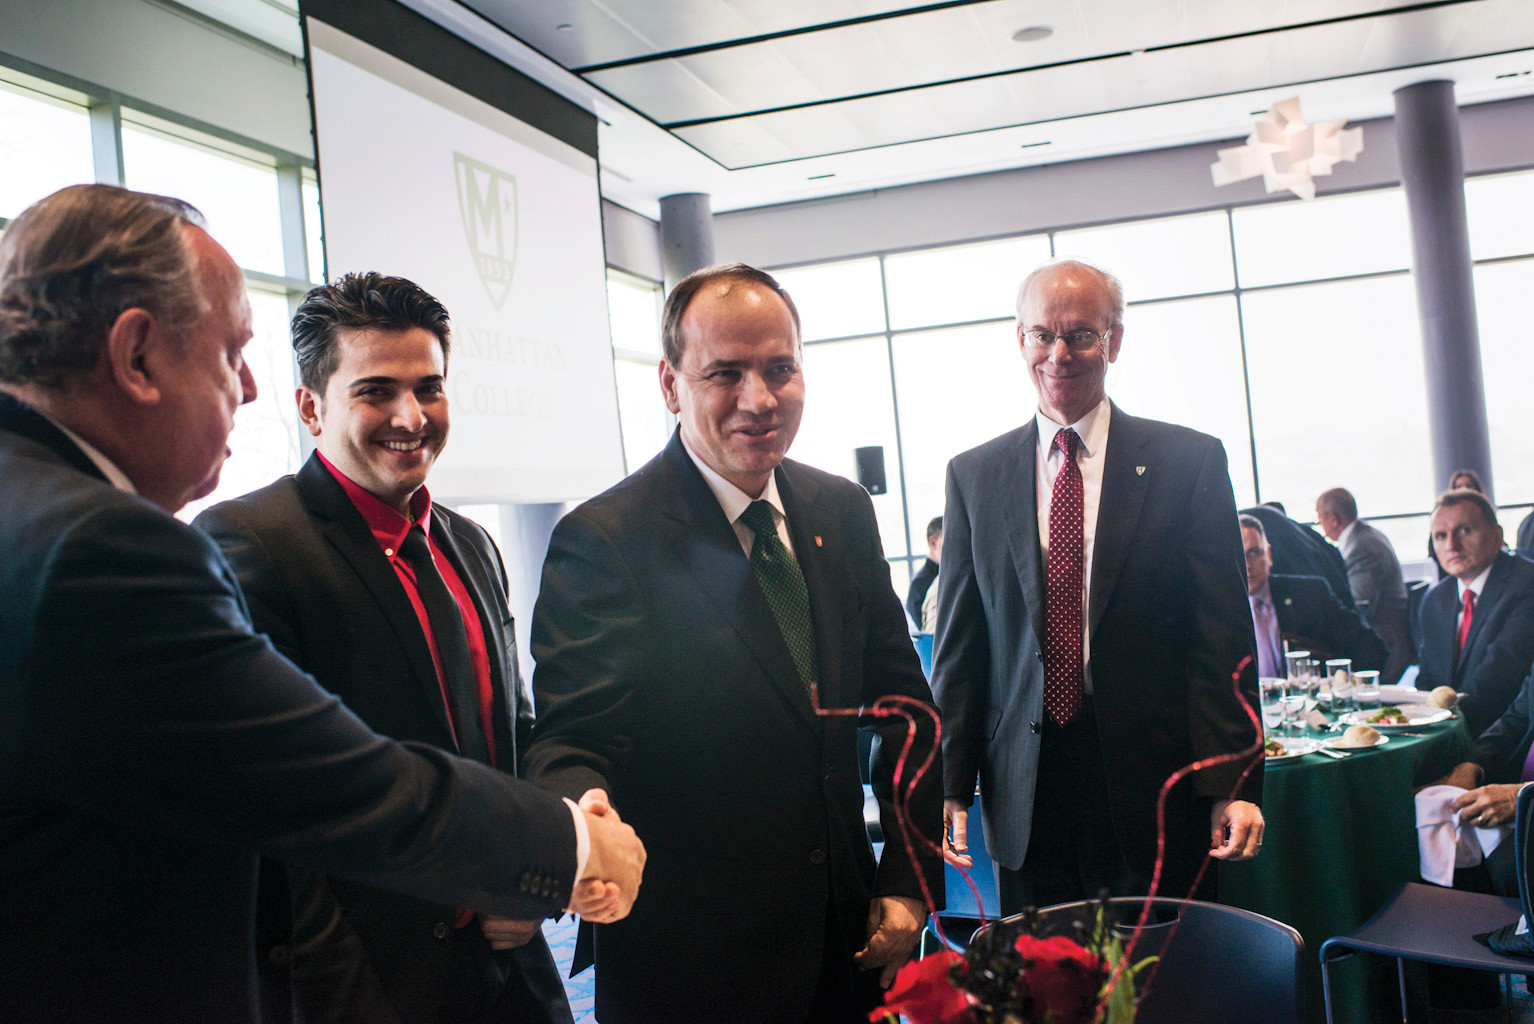 Albanian President Bujar Nishani greets members of the Manhattan College board in the Kelly Commons on May 7.